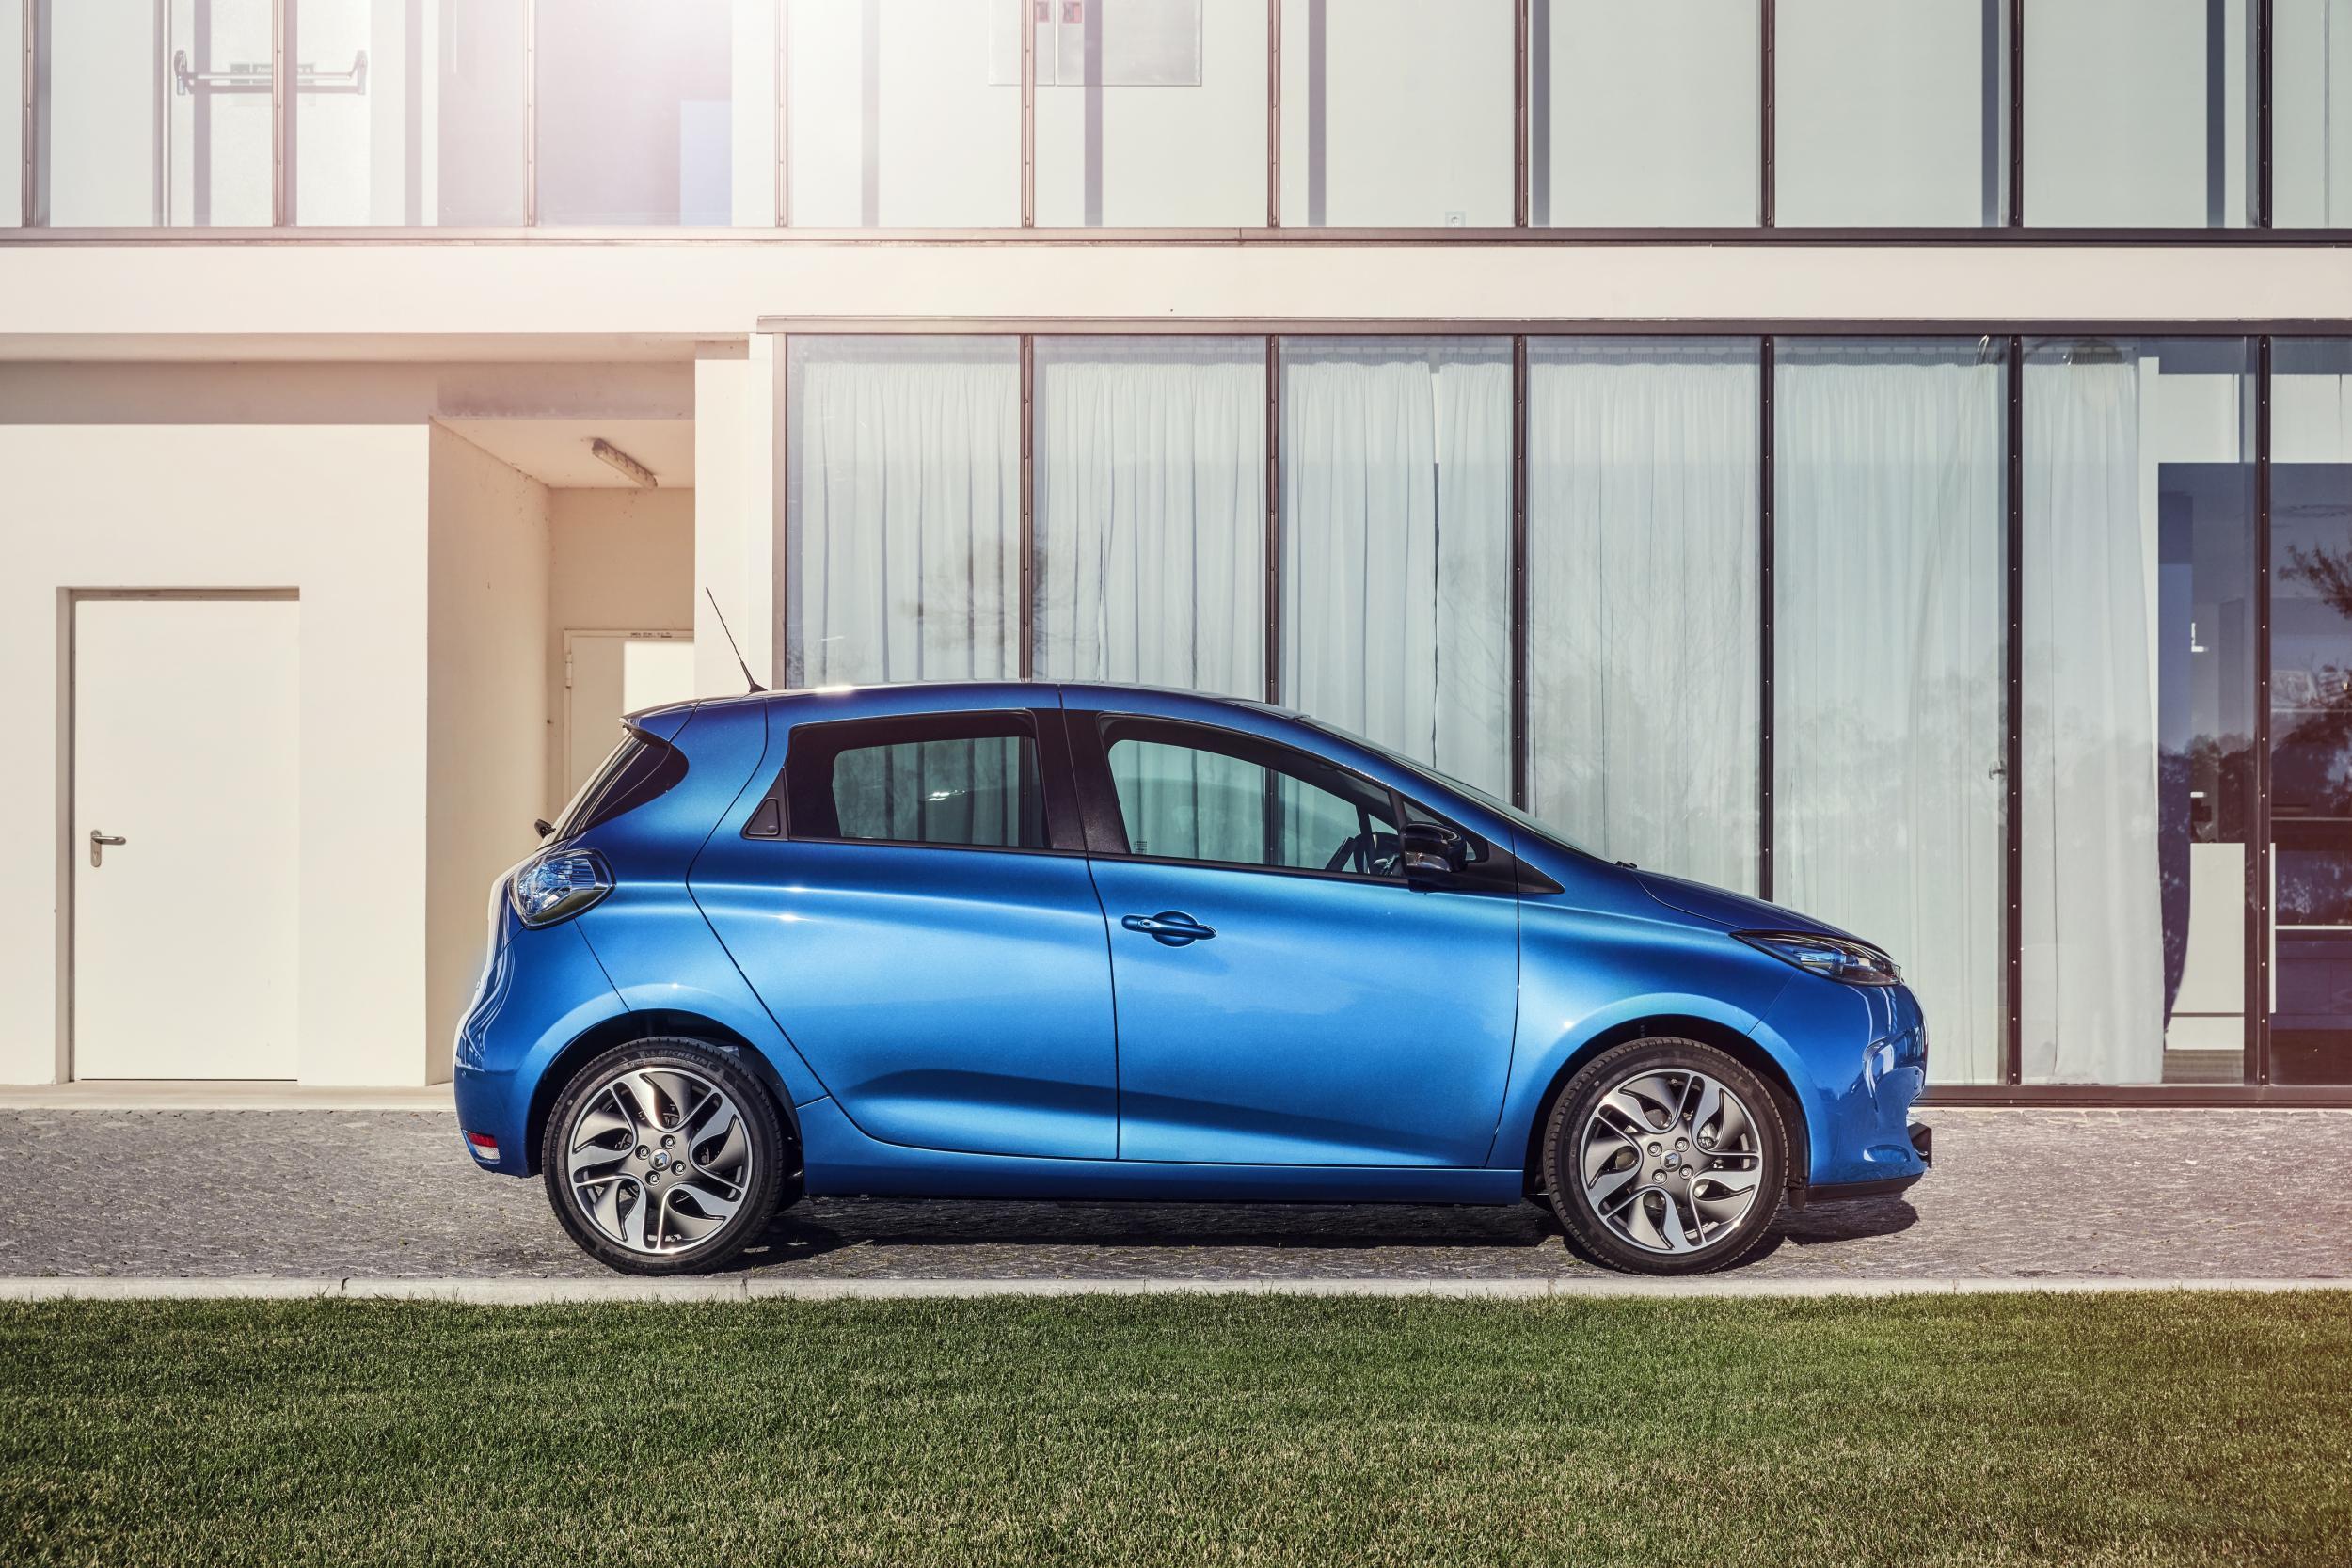 Buy a Zoe and you’ll be getting negligible running costs, reliability every bit as good as anything with an internal combustion engine, and an utterly quiet, refined ride. You also get a car that is fun to drive